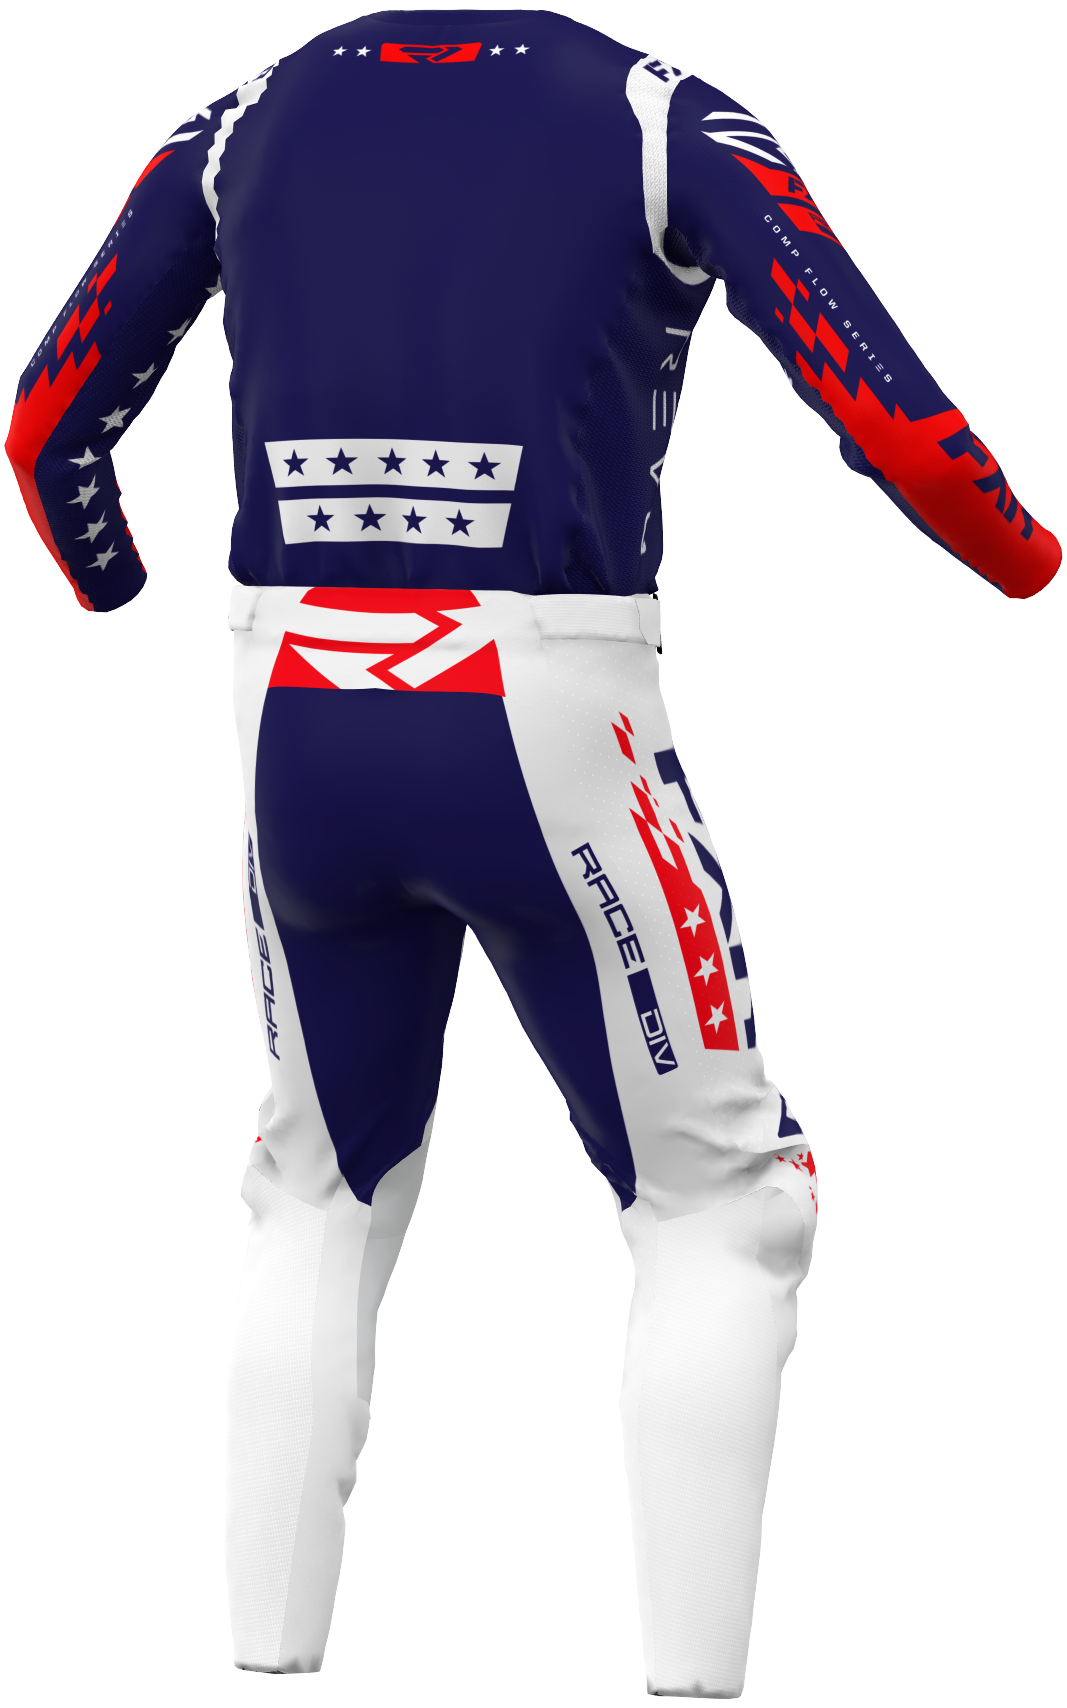 A 3D image of FXR's RevoFreedom MX Jersey and Pant in Navy/Red/White colorway